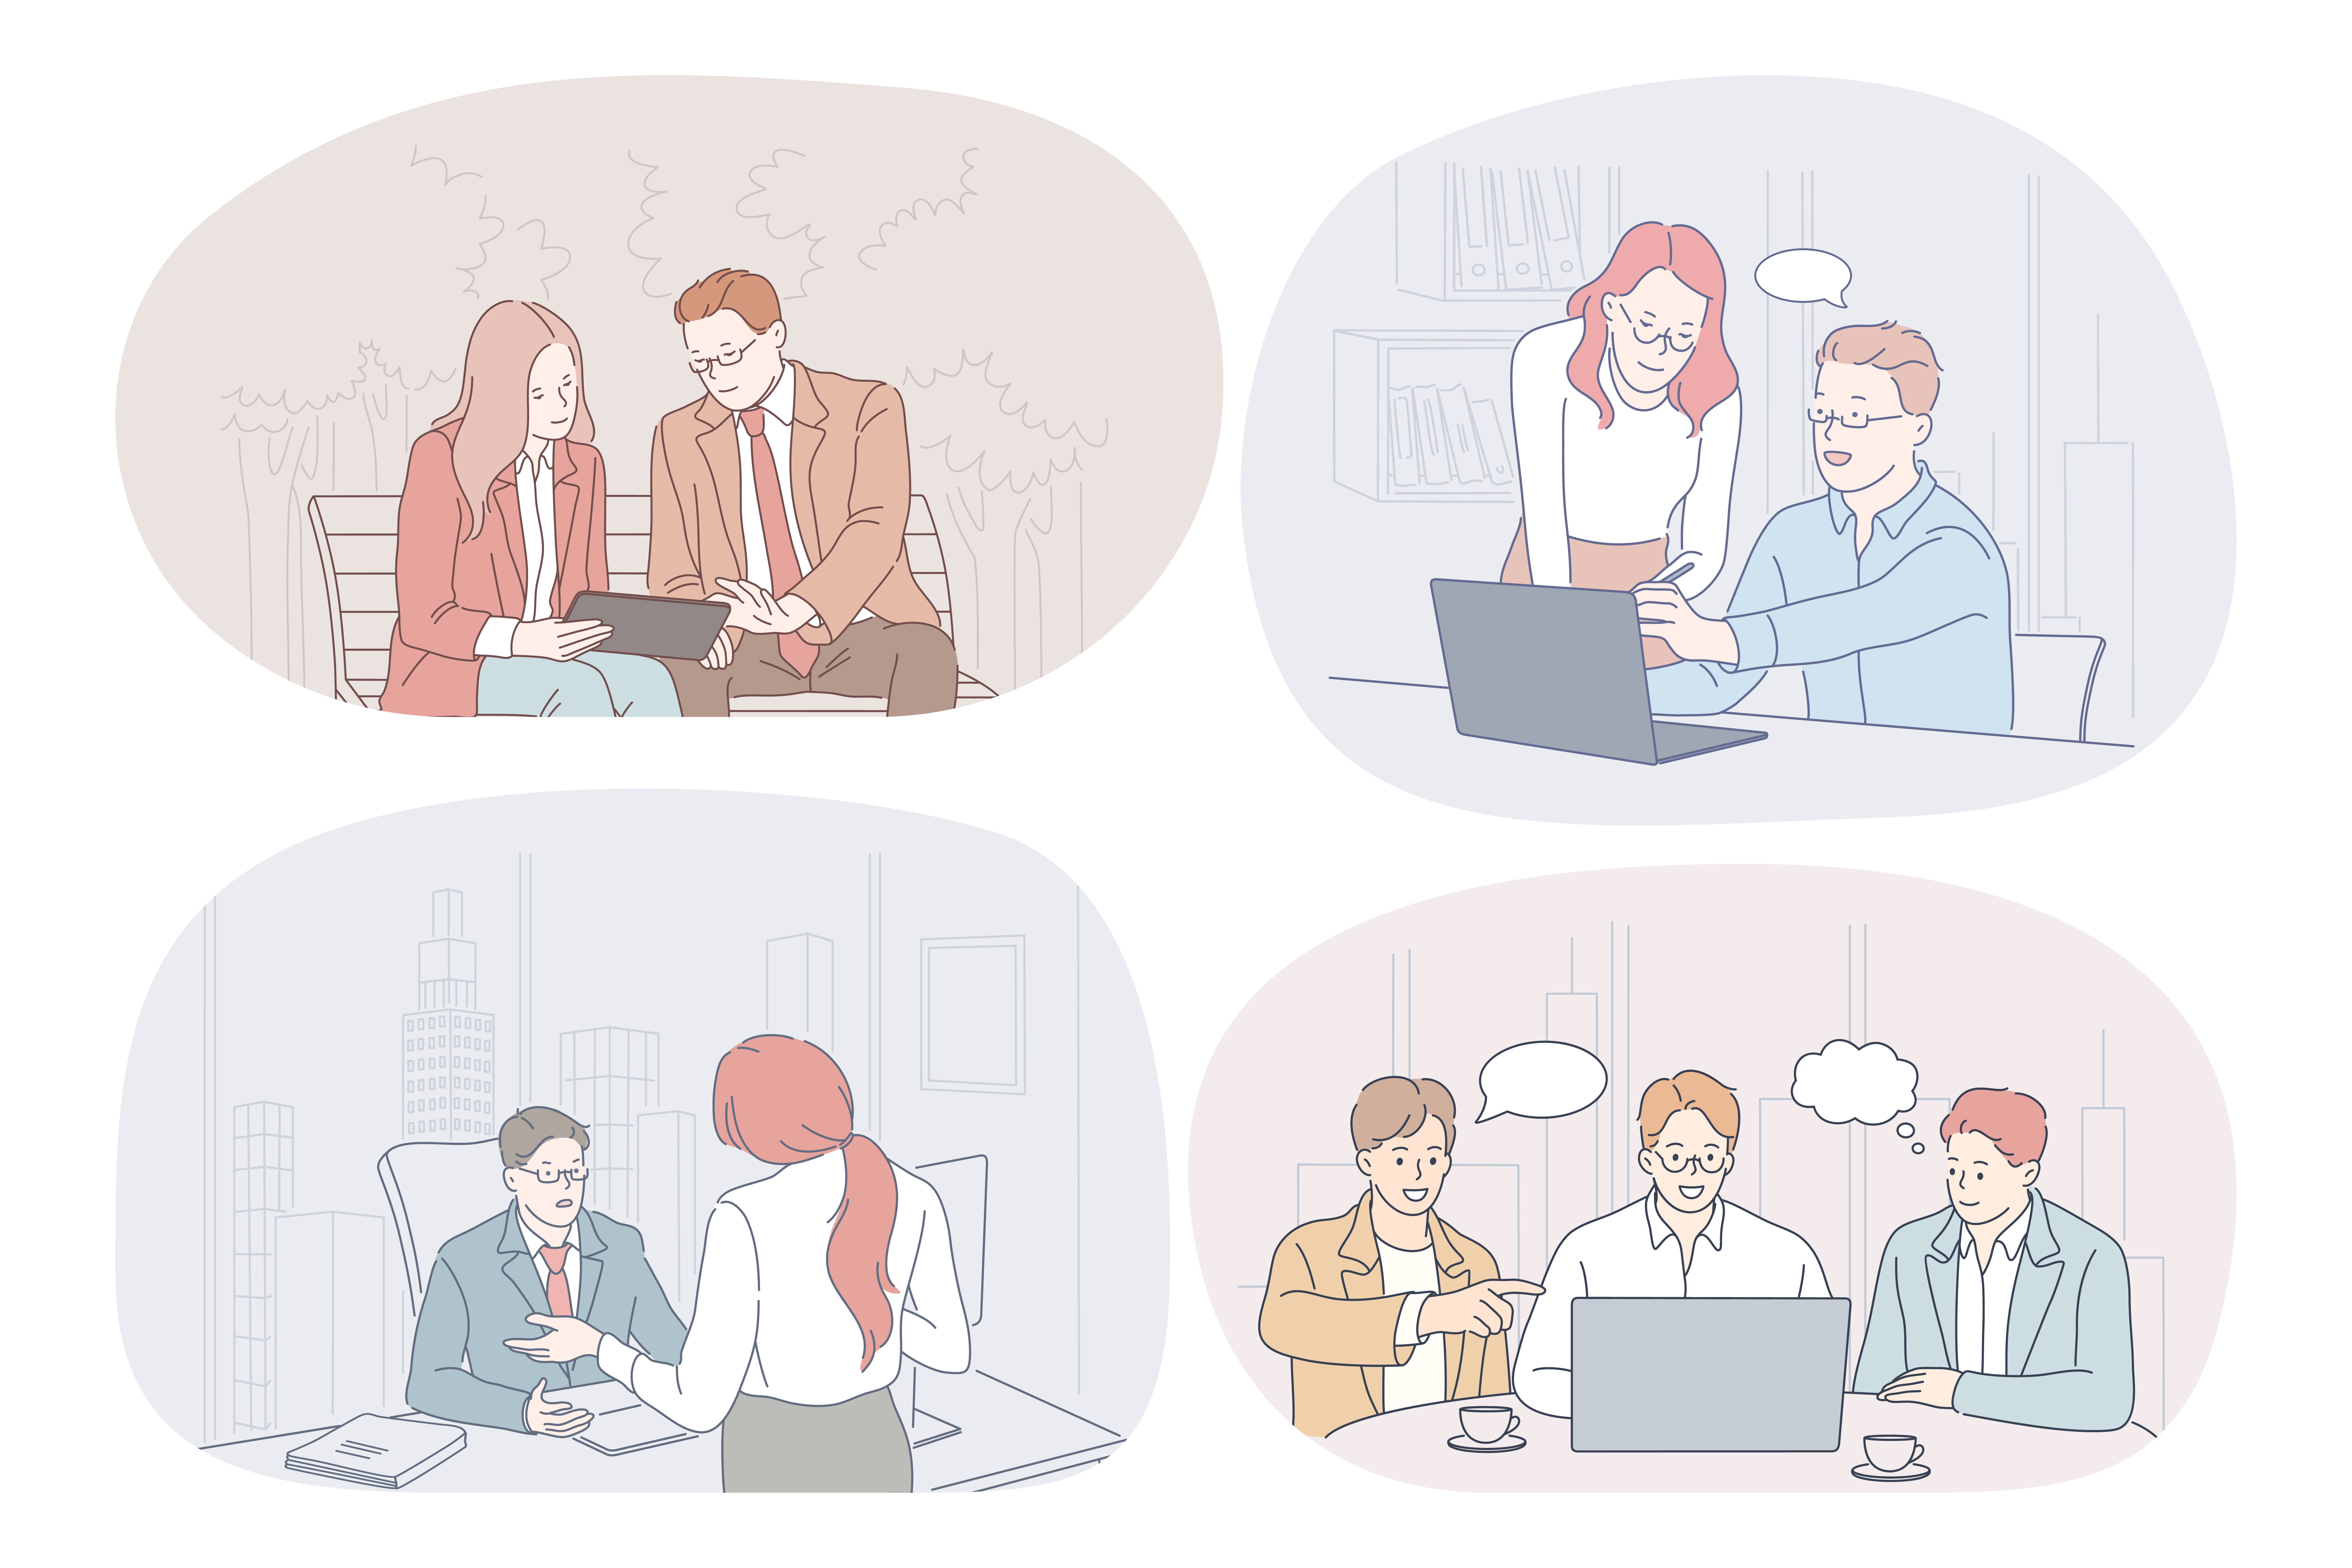 Teamwork, communication, business, cooperation, discussion, report concept. Business people partners coworkers discussing working projects, having brainstorming, making presentations together. Teamwork, communication, business, cooperation, discussion, report concept